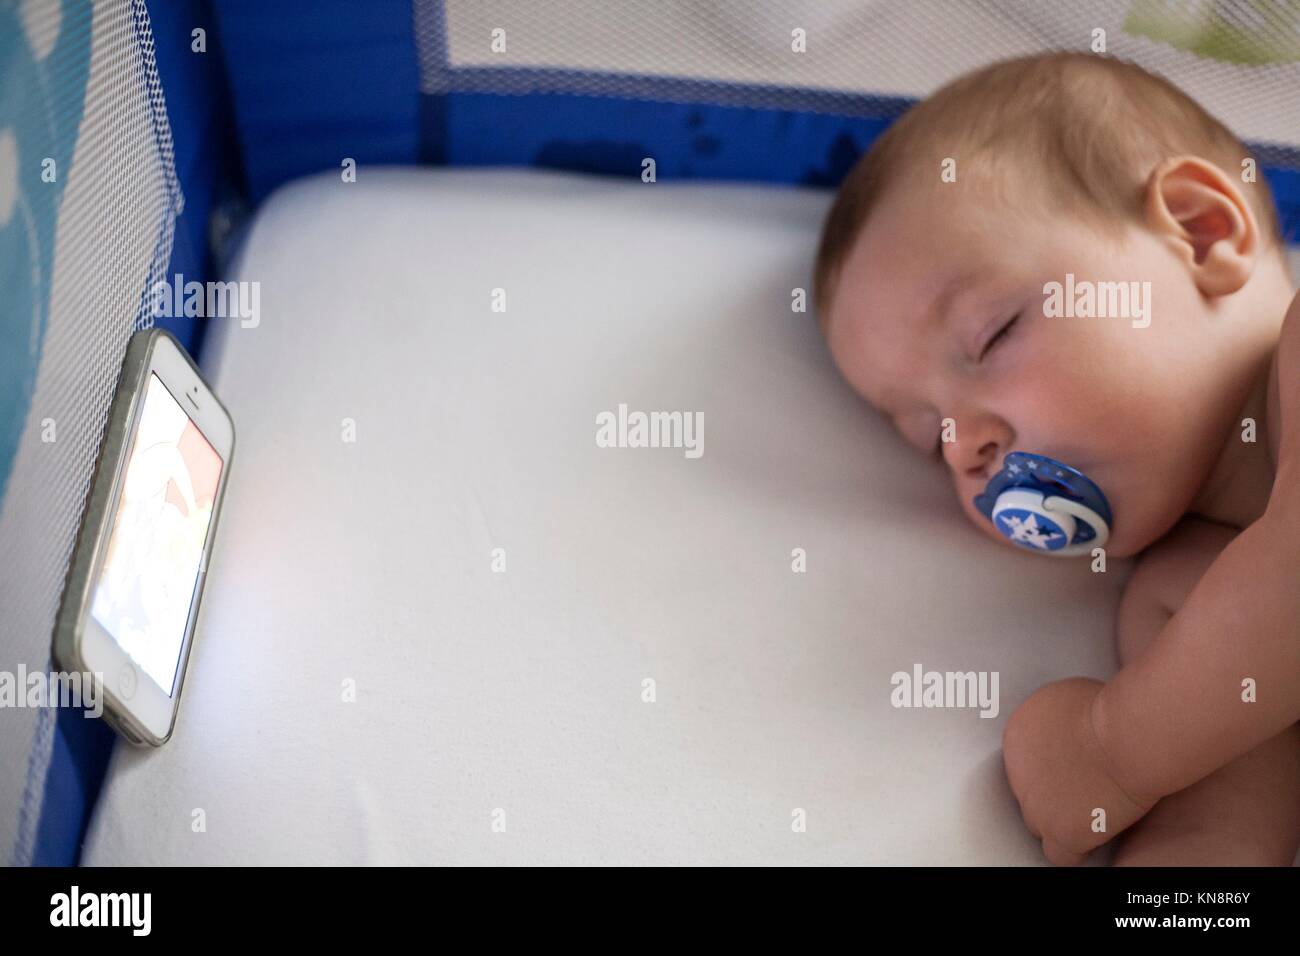 12 month old baby sleeping with a lullaby songs from mobile phone on the crib. Stock Photo